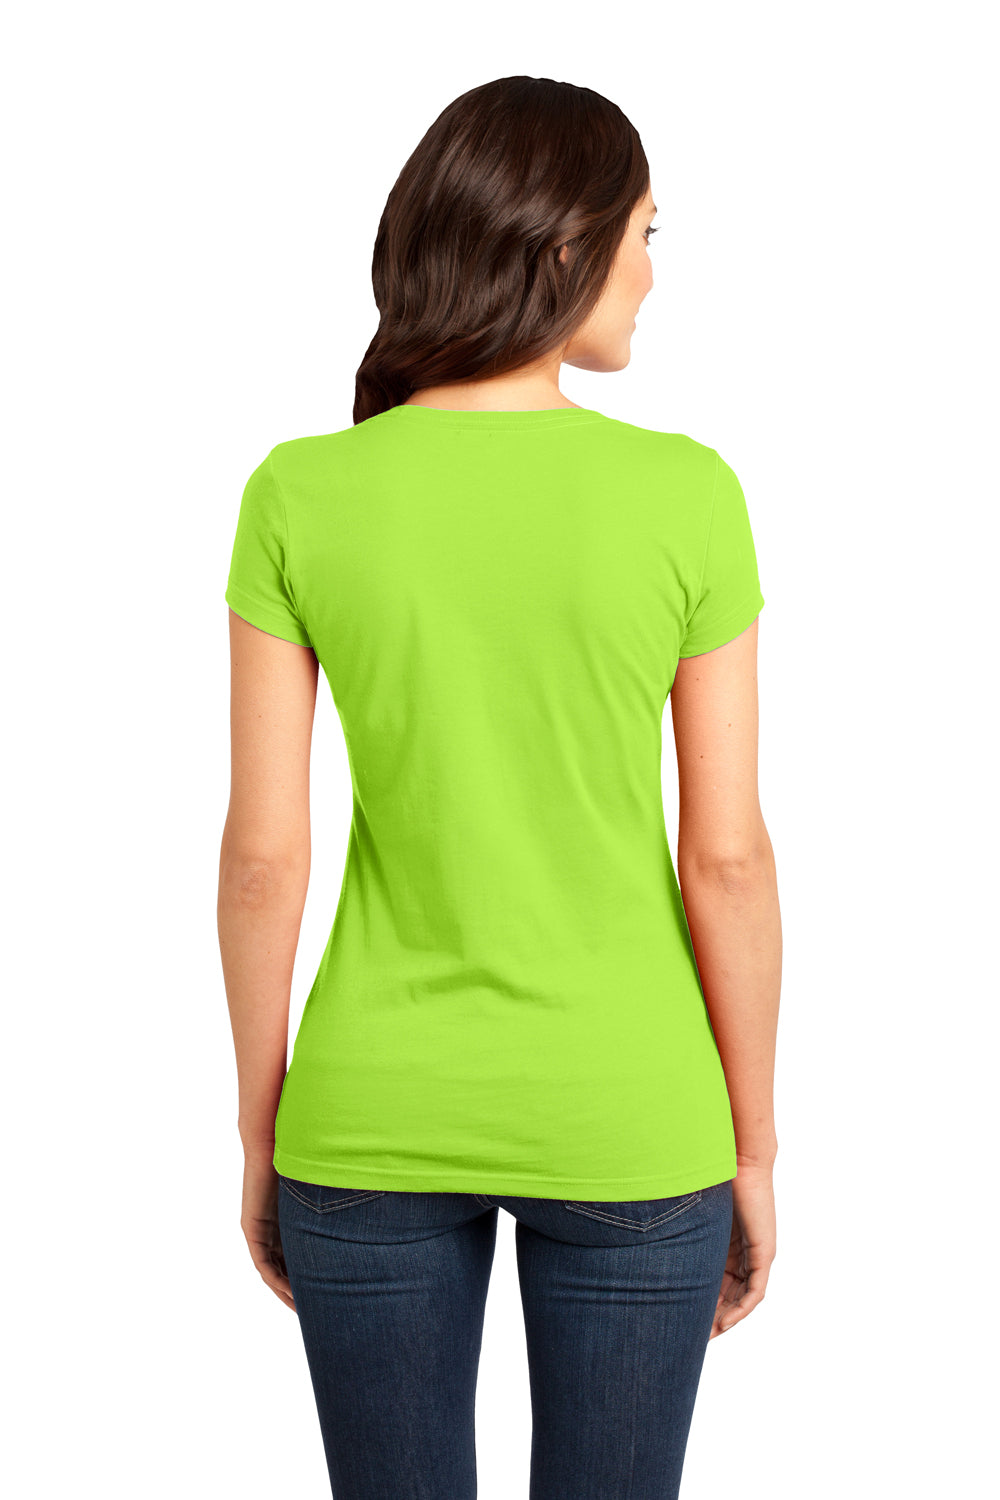 District DT6001 Womens Very Important Short Sleeve Crewneck T-Shirt Lime Green Back